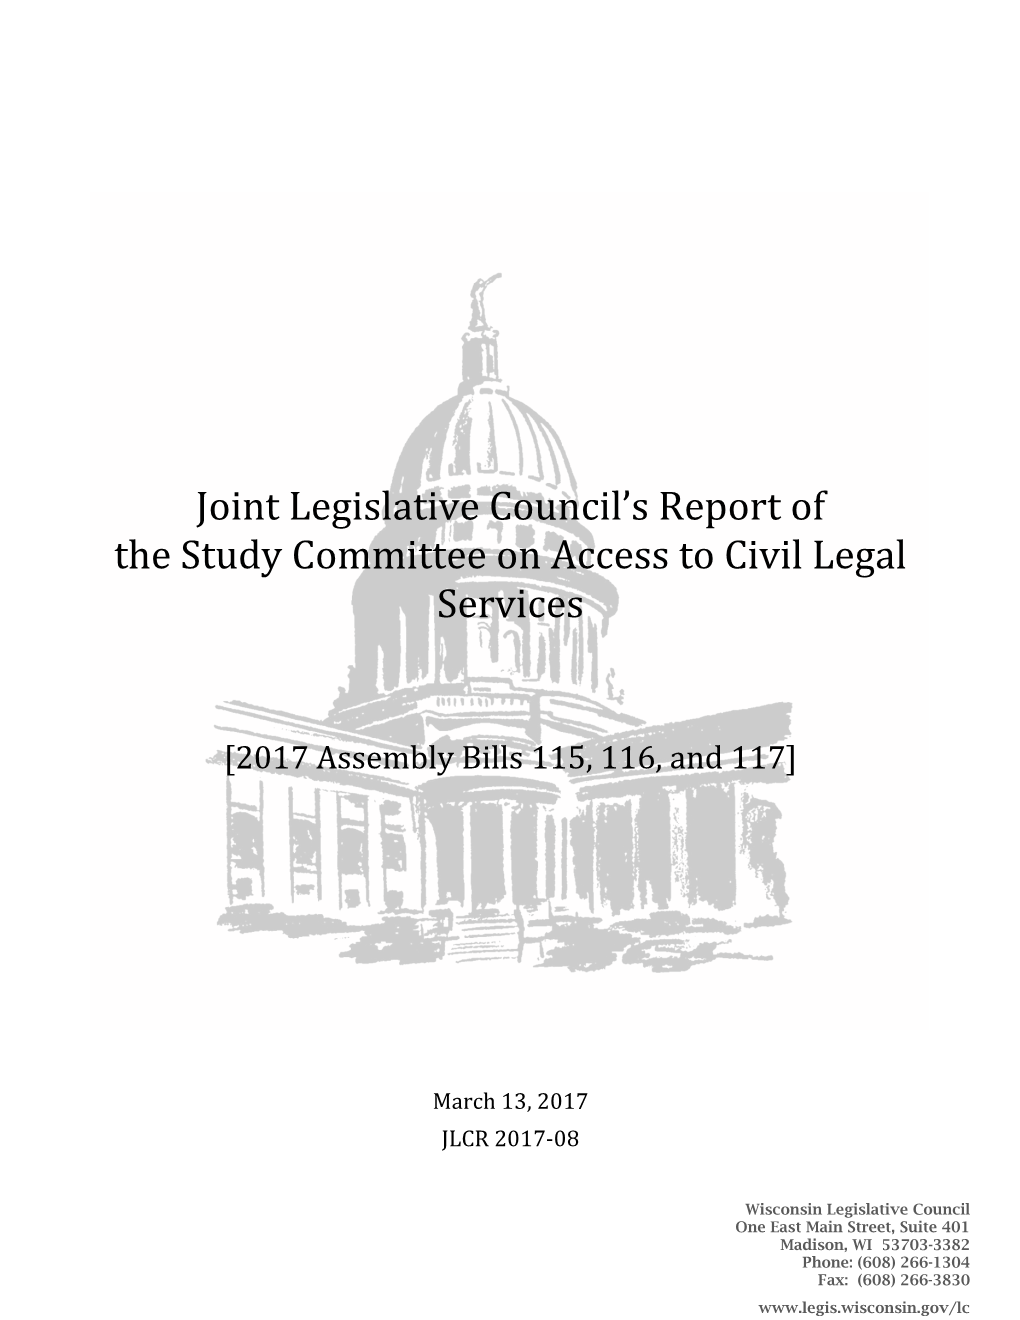 Joint Legislative Council's Report of the Study Committee on Access to Civil Legal Services